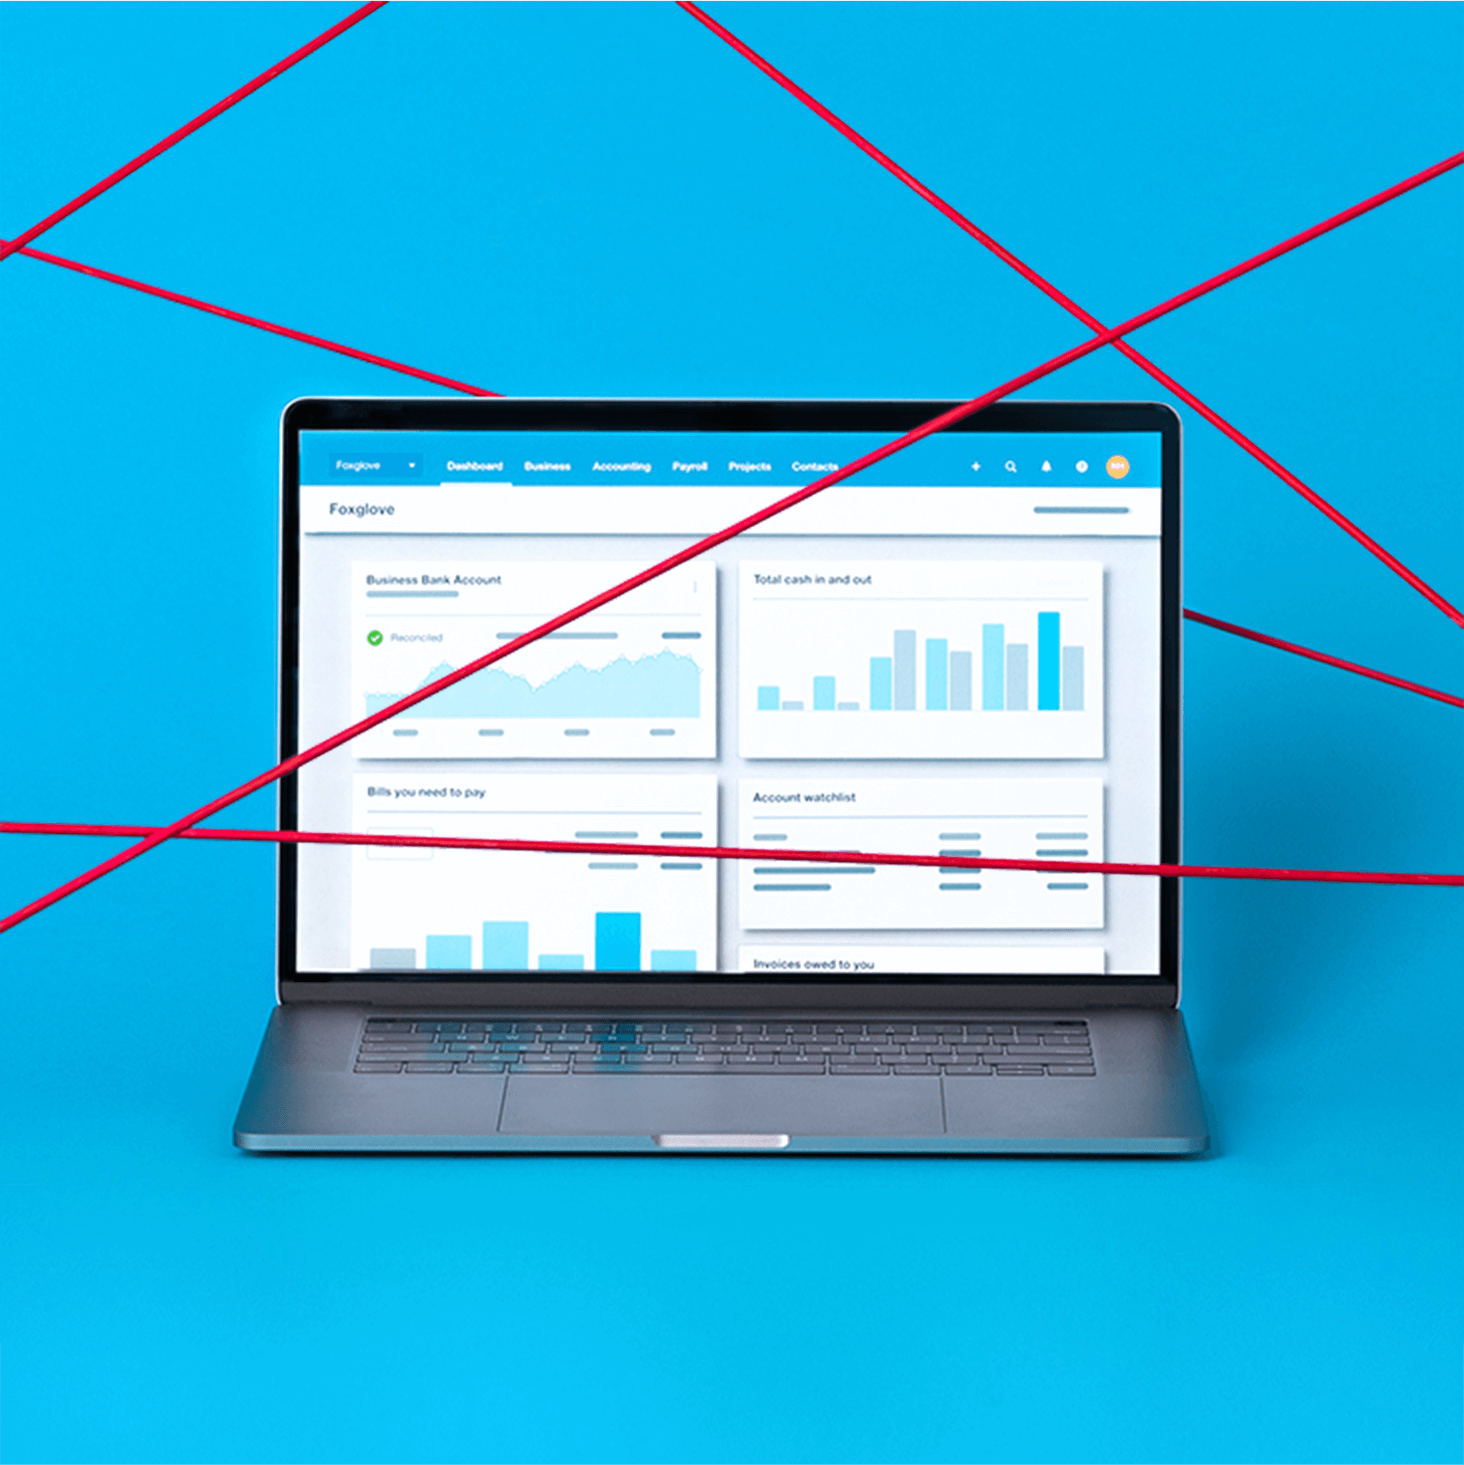 A laptop displaying business data in Xero is criss-crossed with red wire, indicating it’s protected from unauthorized access.